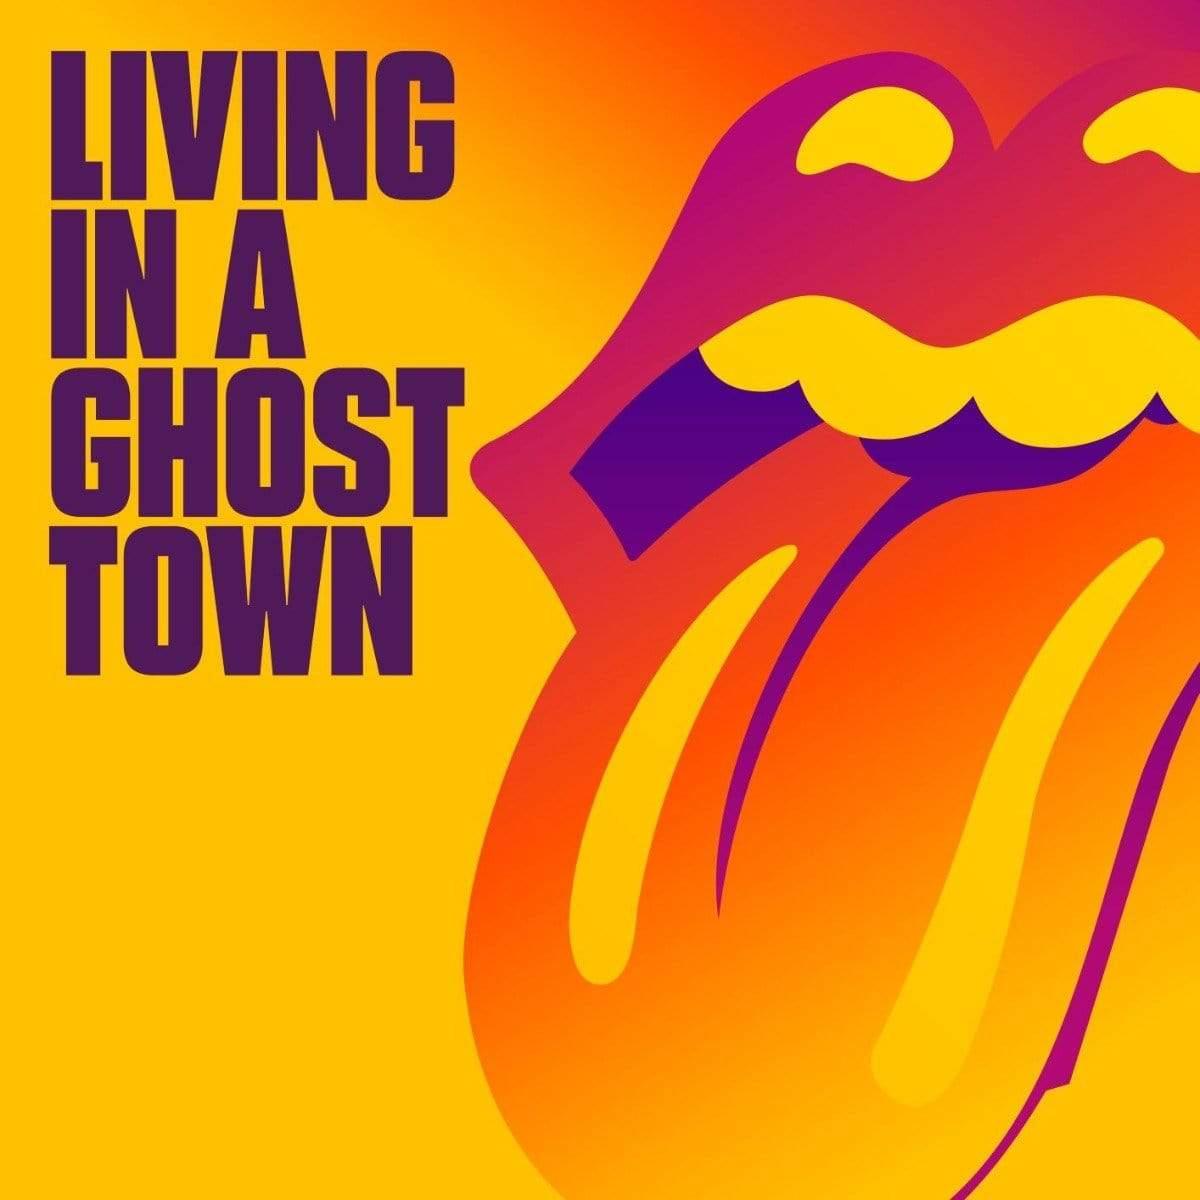 The Rolling Stones - Living In A Ghost Town [10” Orange Vinyl Single] - Joco Records